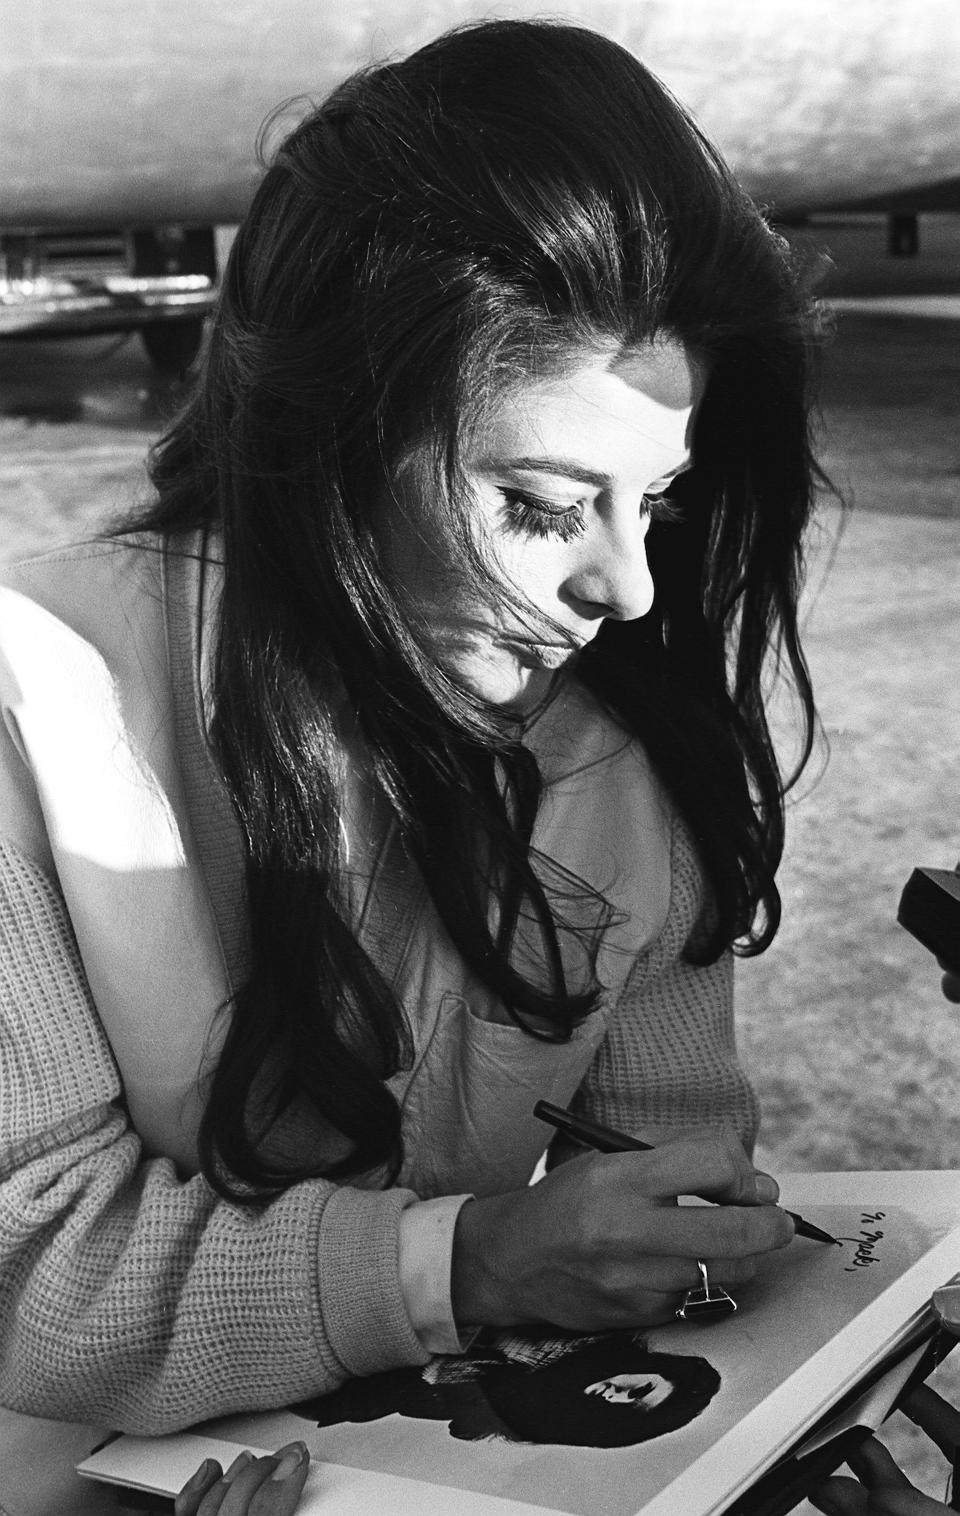 Singer Bobbie Gentry signs her autograph outside the airport in Nashville in 1967.